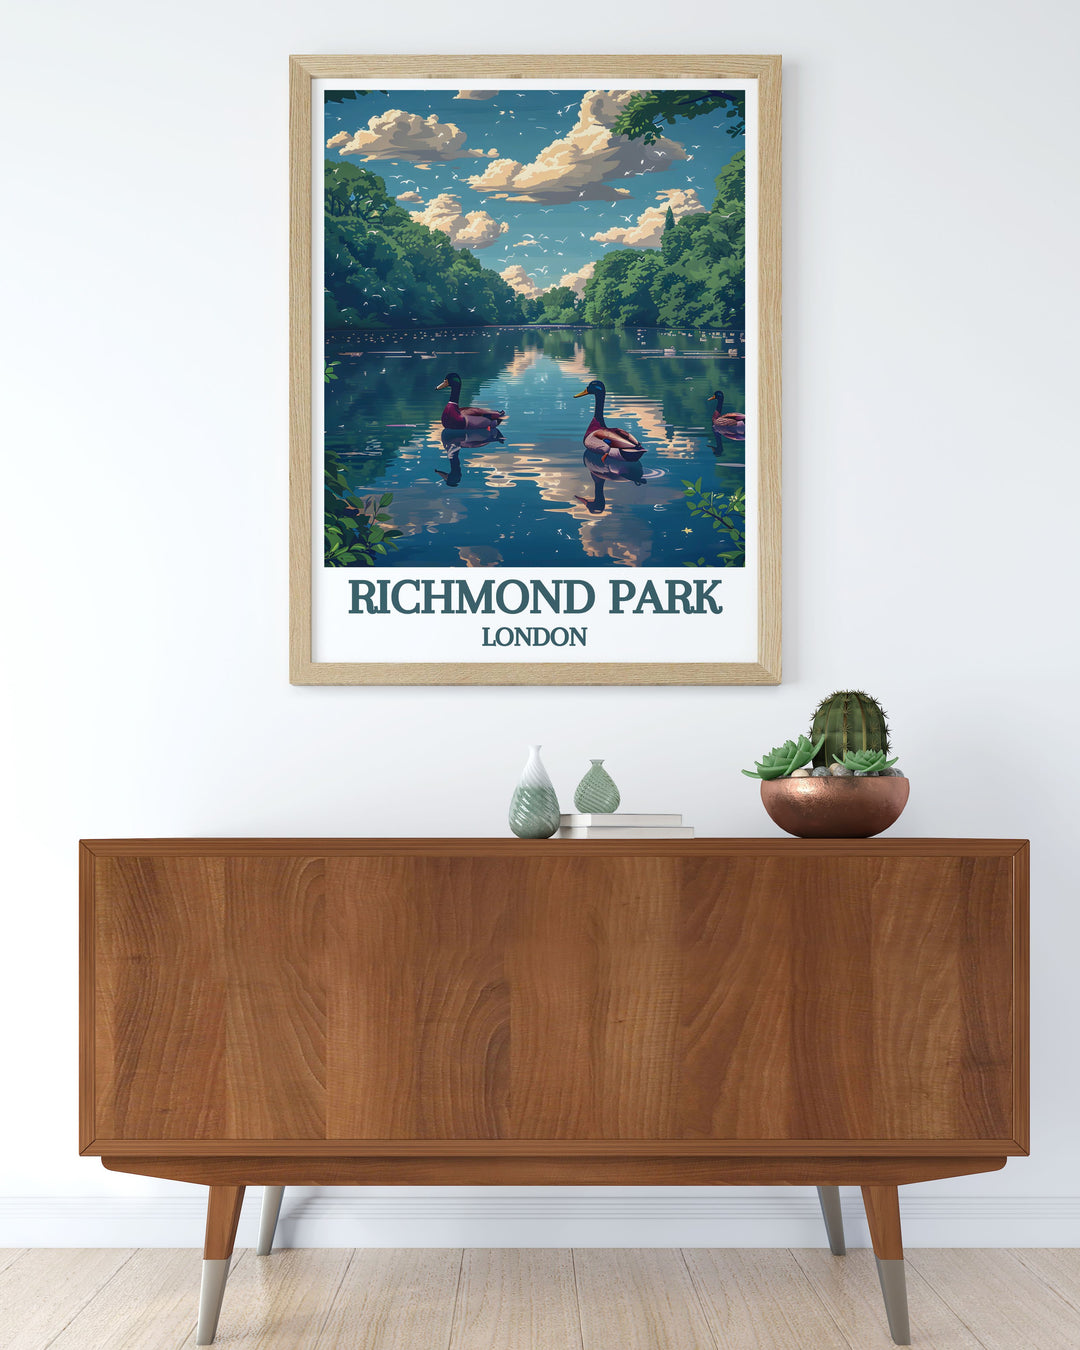 Richmond Park Wall Art capturing the serene atmosphere and iconic views of Pen Ponds, perfect for any decor.